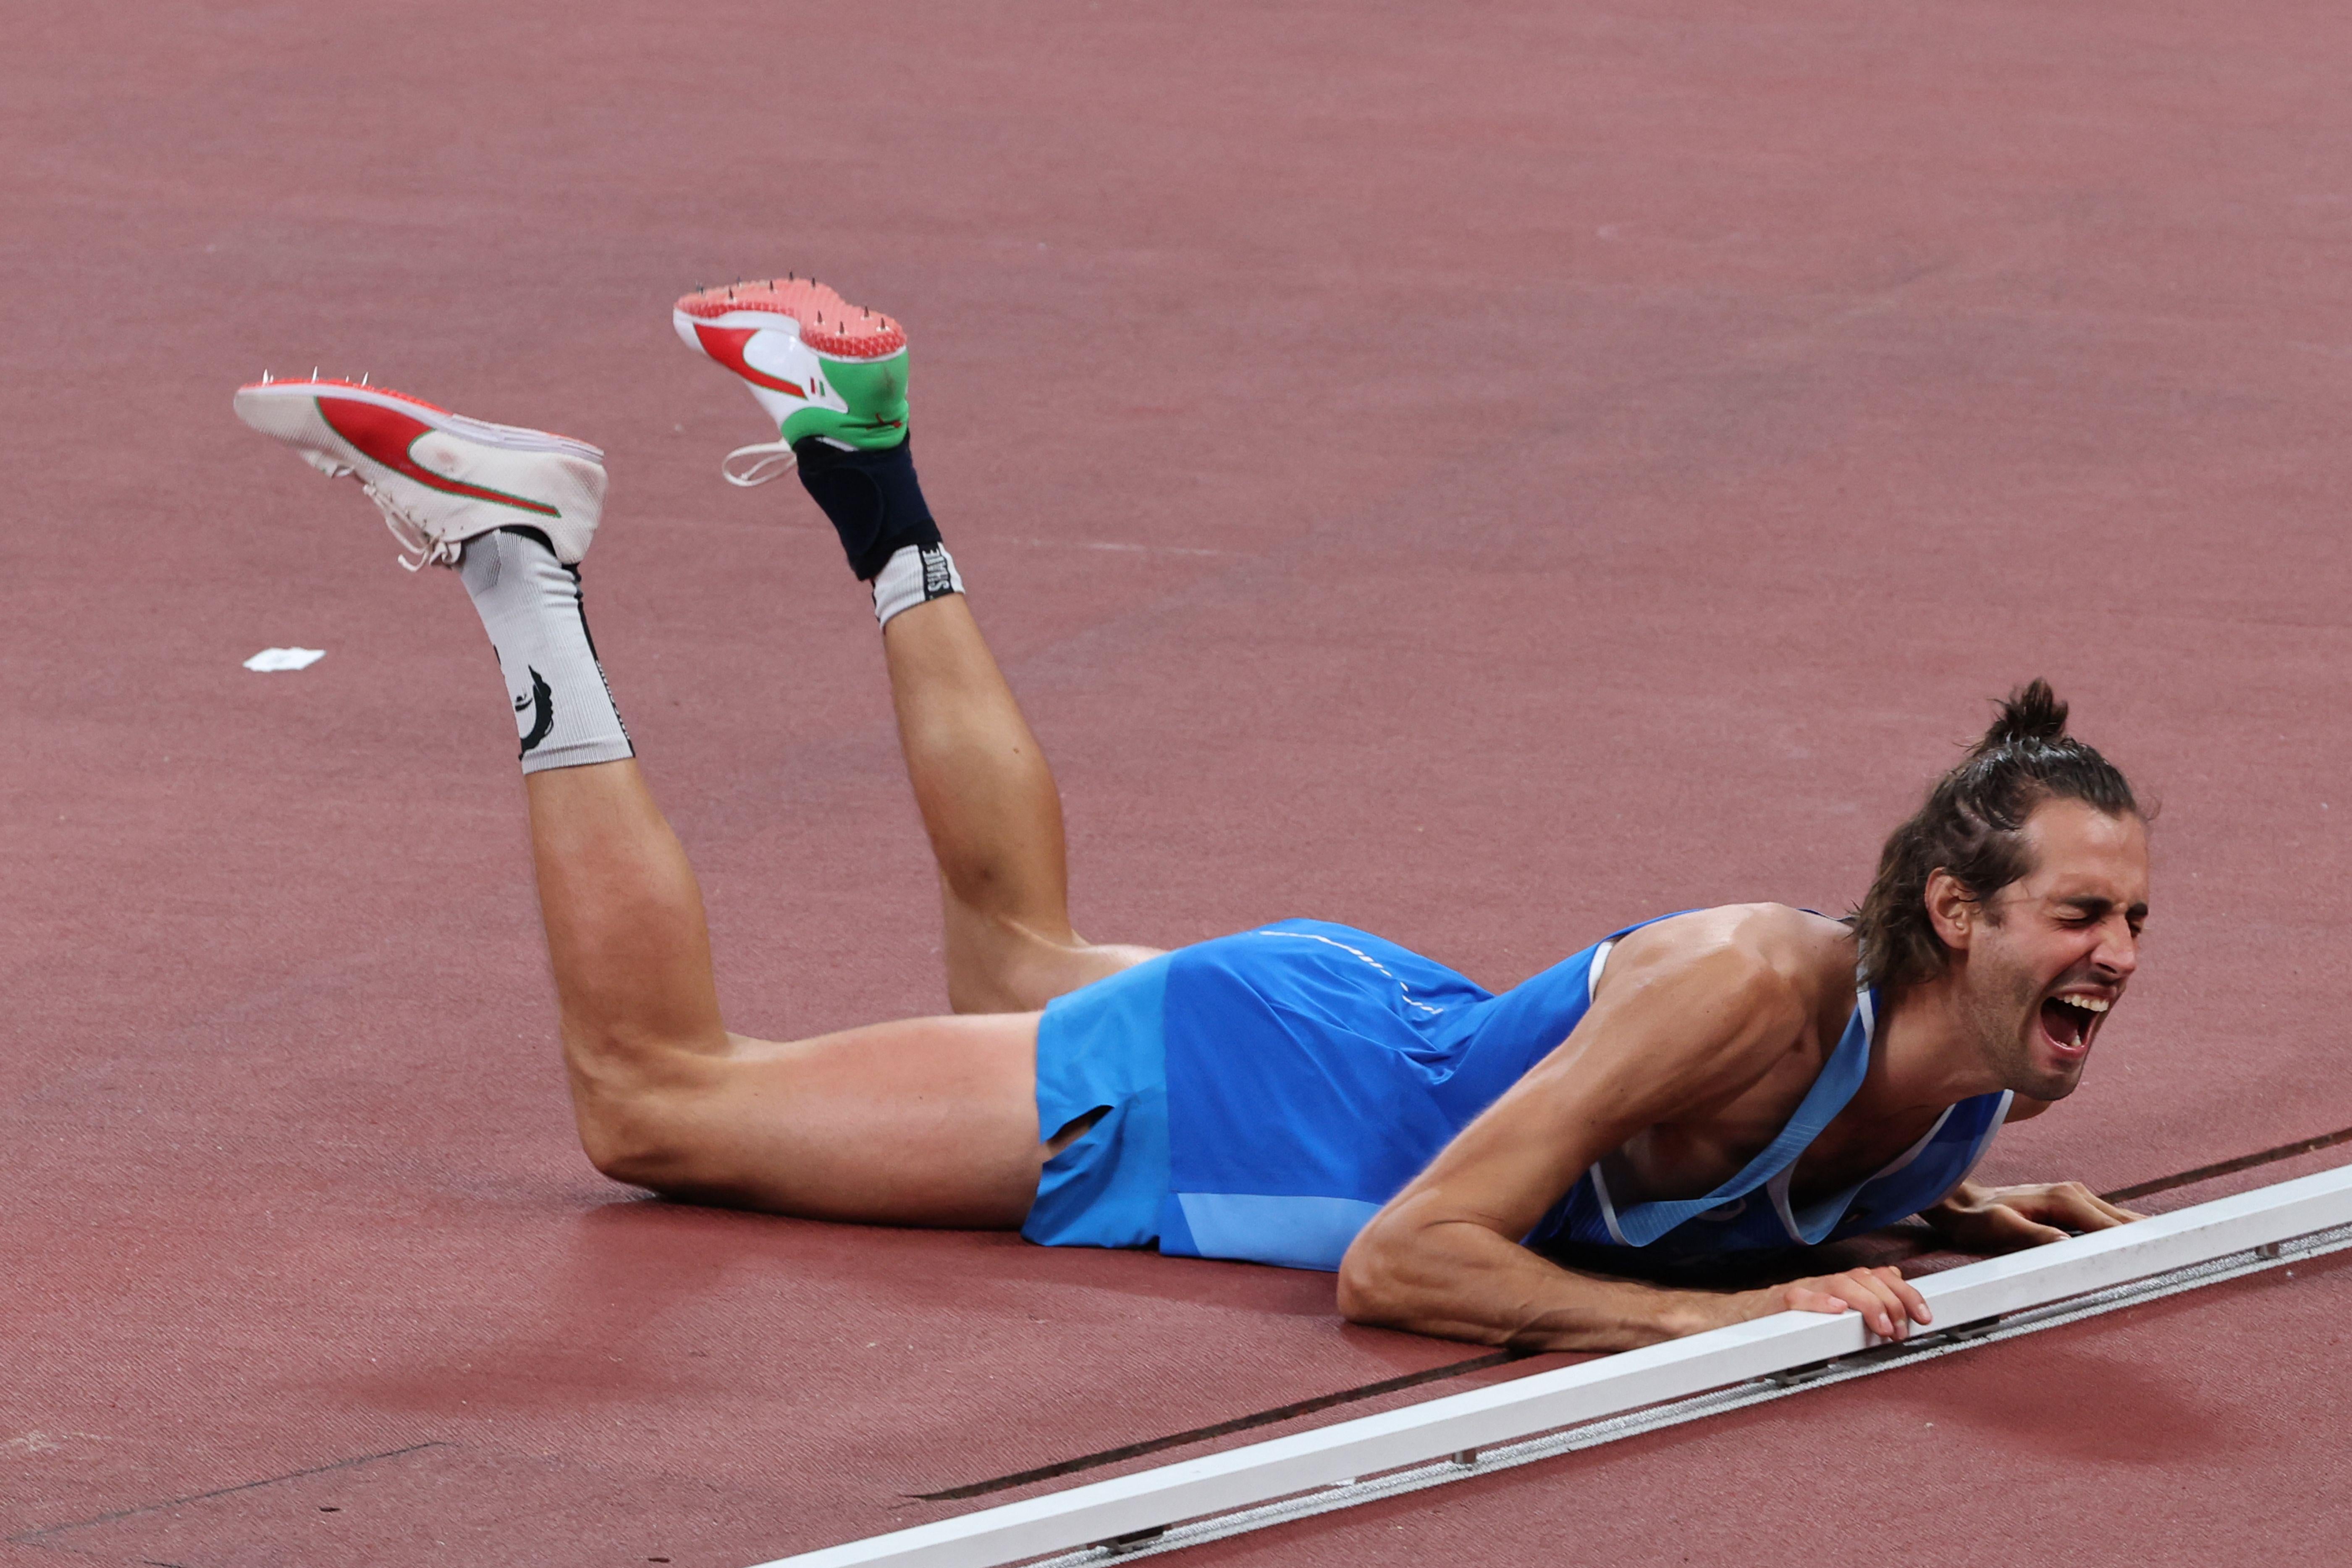 A tall, lanky high jumper lies belly-down on the ground, his legs raised behind him, screaming.